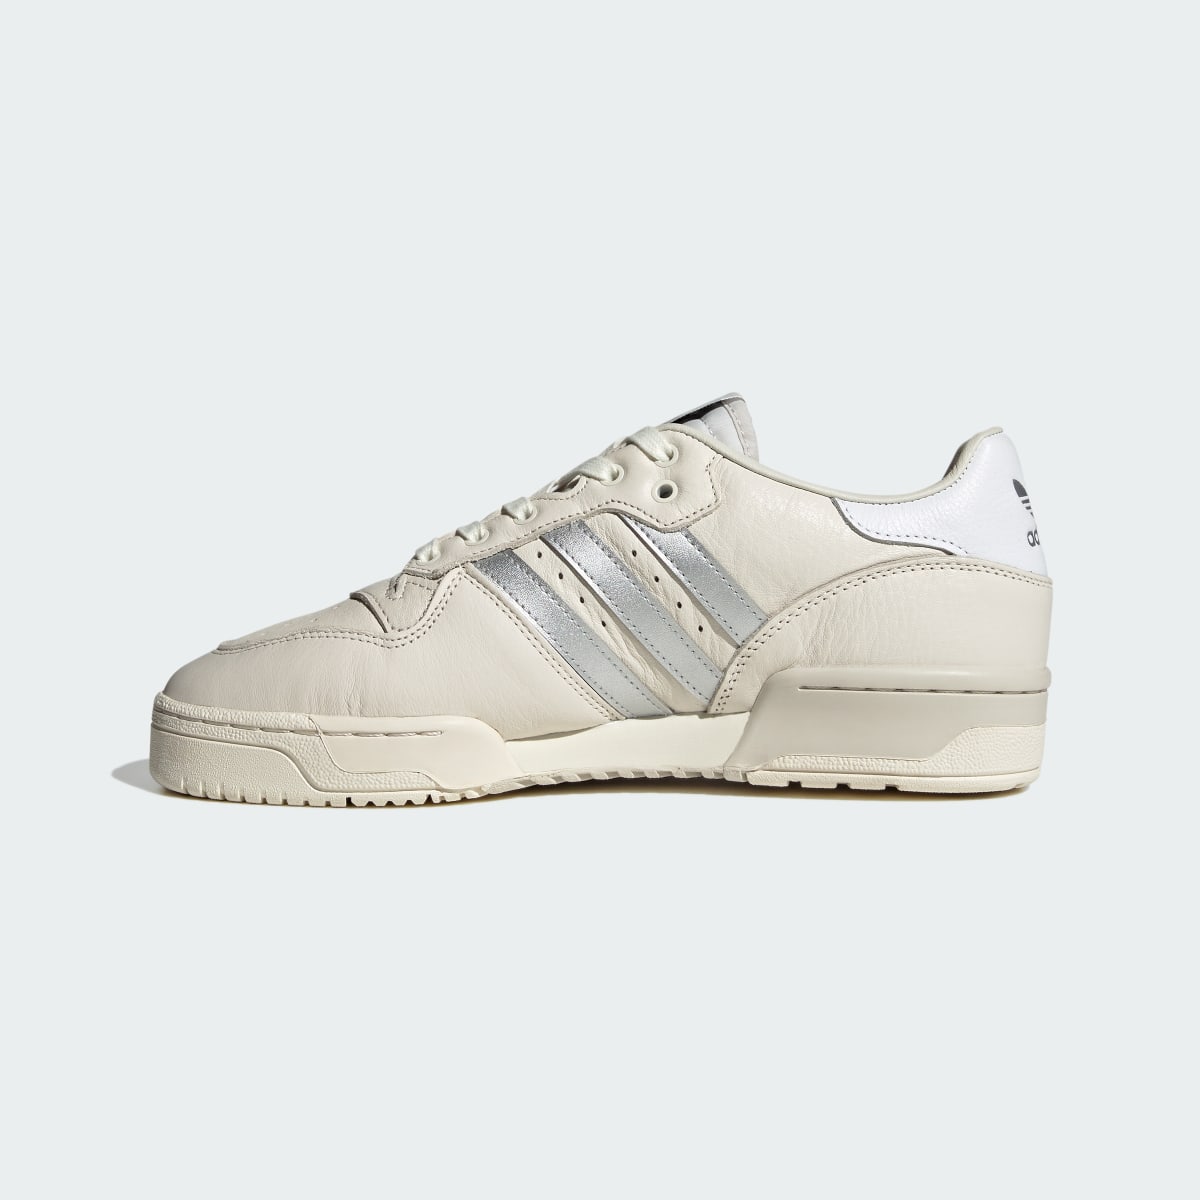 Adidas Rivalry Low Consortium Shoes. 8